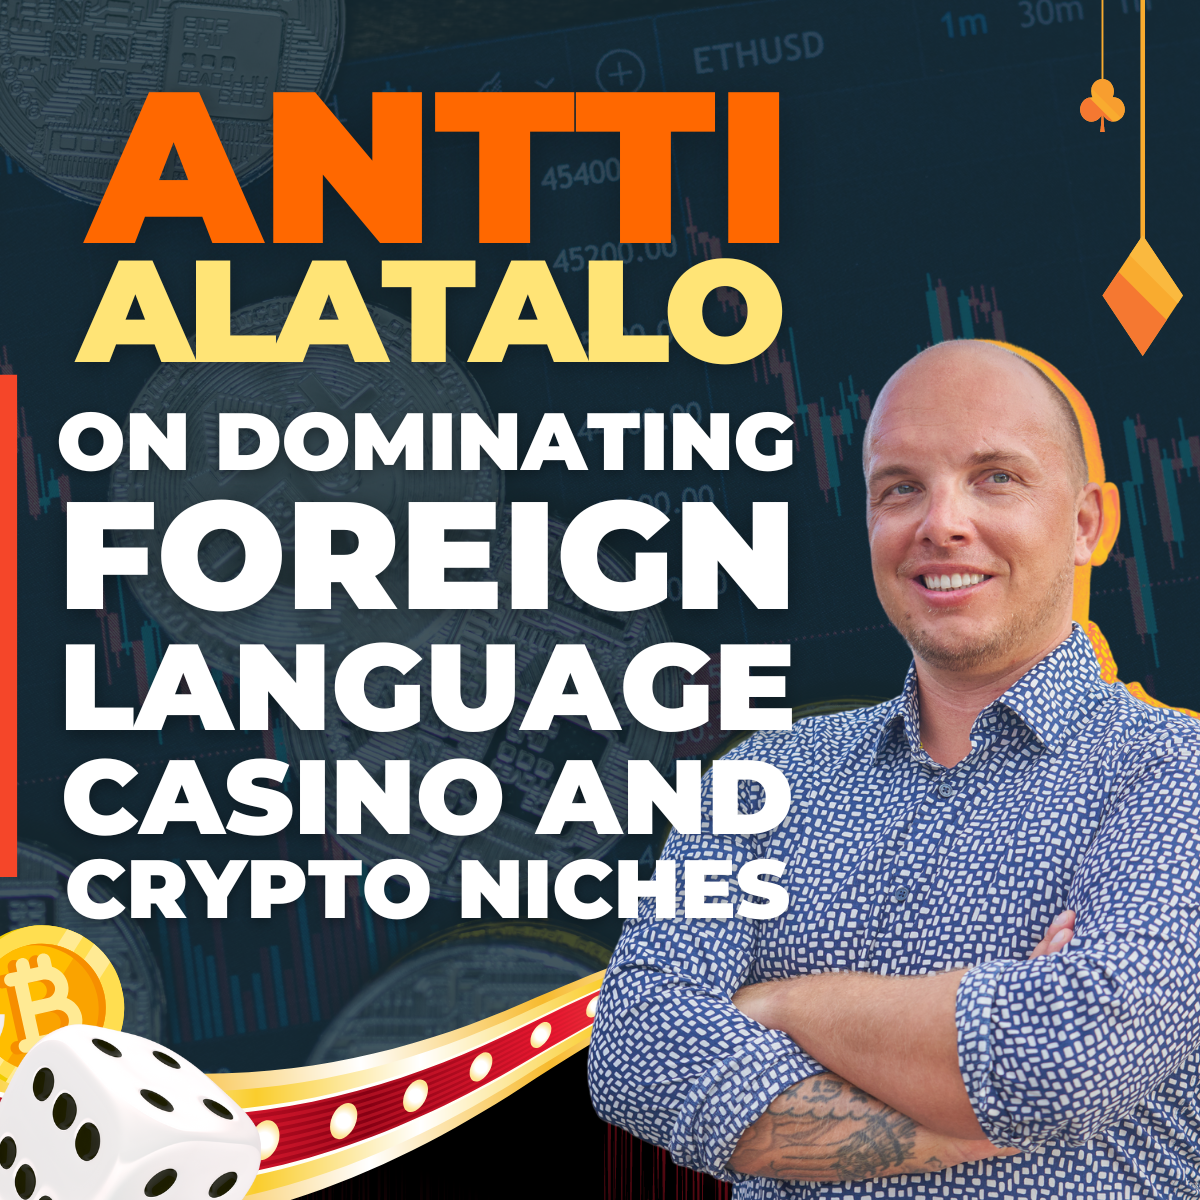 Antti Alatalo on dominating foreign language casino and crypto niches